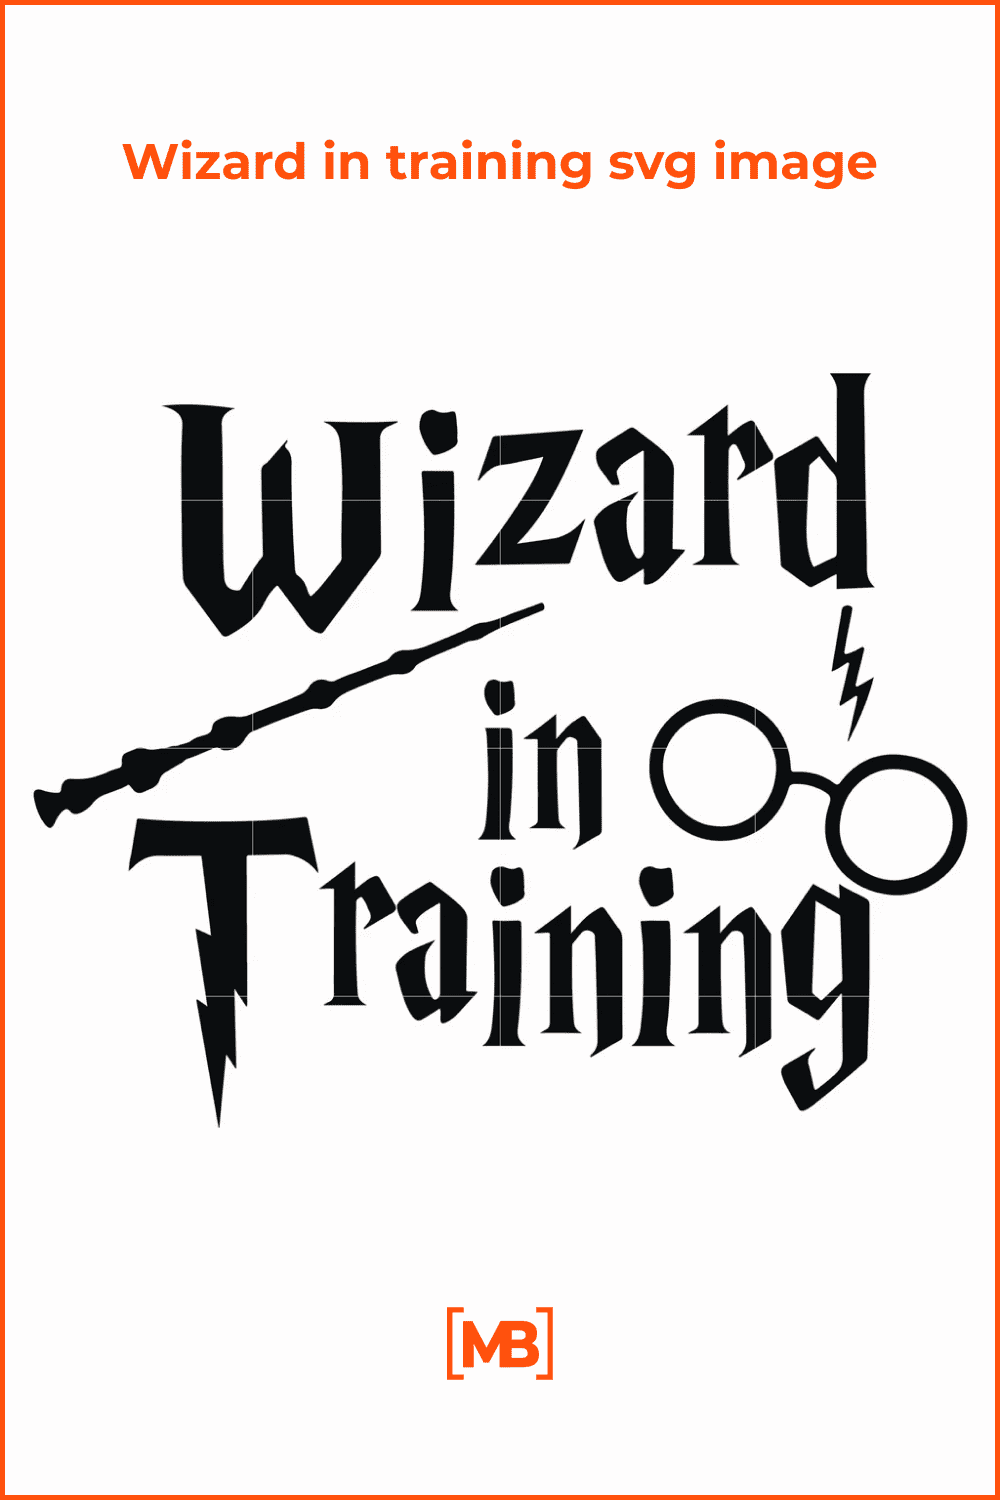 Wizard in training svg image.